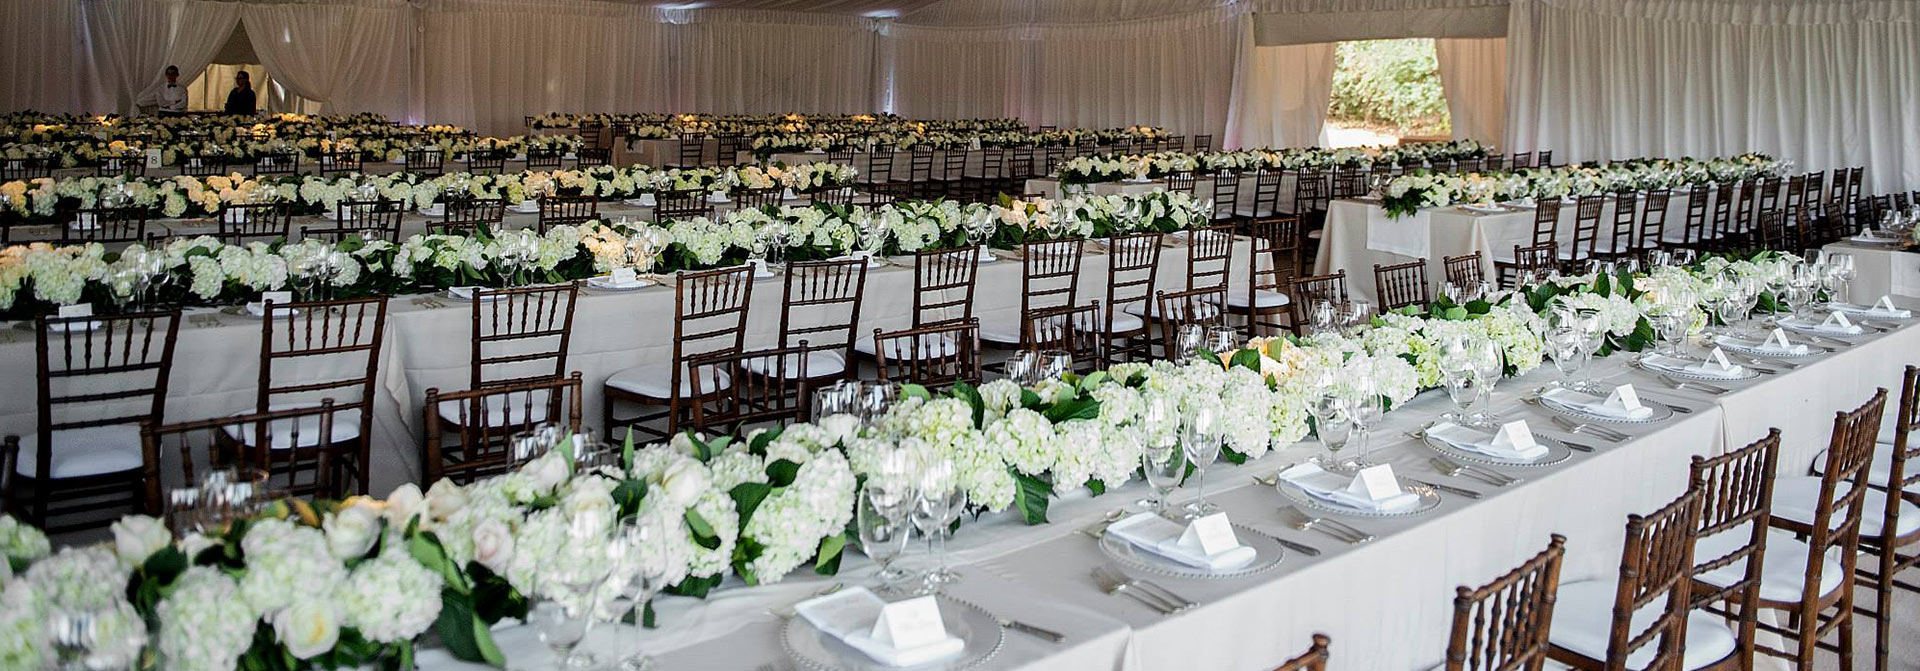 Interior banquet table setting inside event tents in Nashville.